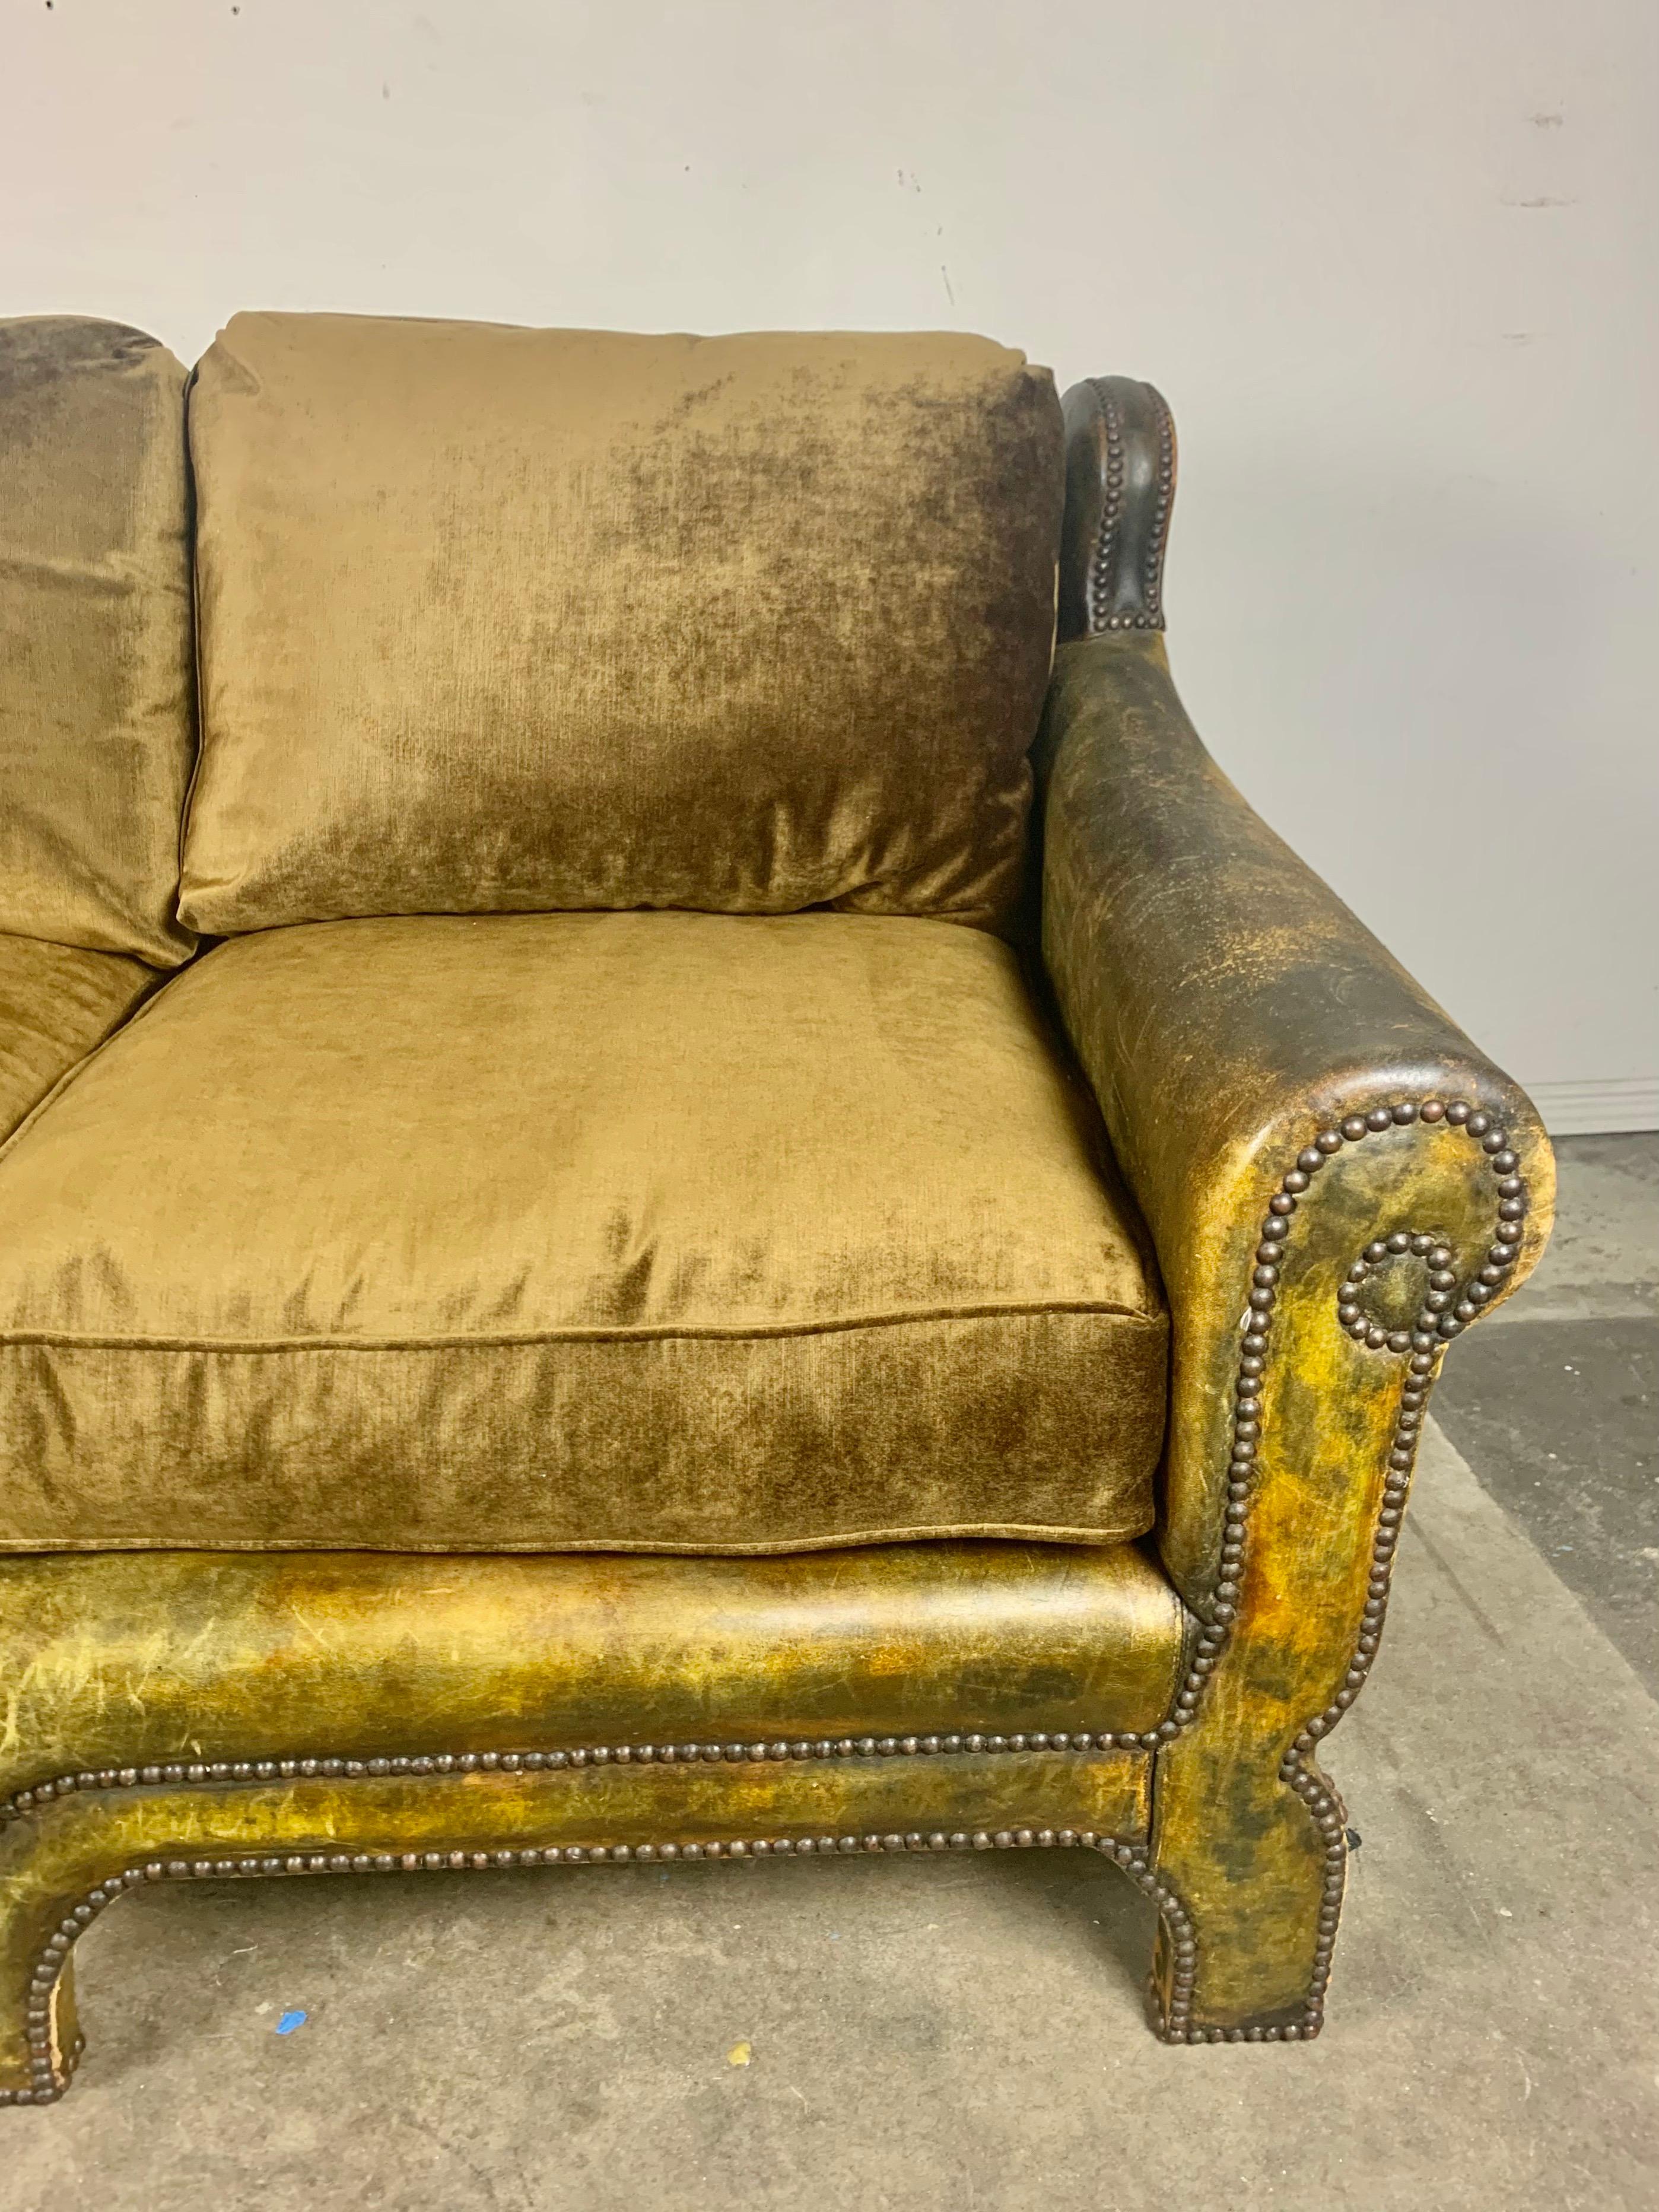 Antique French leather upholstered sofa with original nailhead trim detail. New loose velvet cushions were created to coordinate with the original leather. The back cushions are down filled while the seat cushions are down wrapped. The patina is